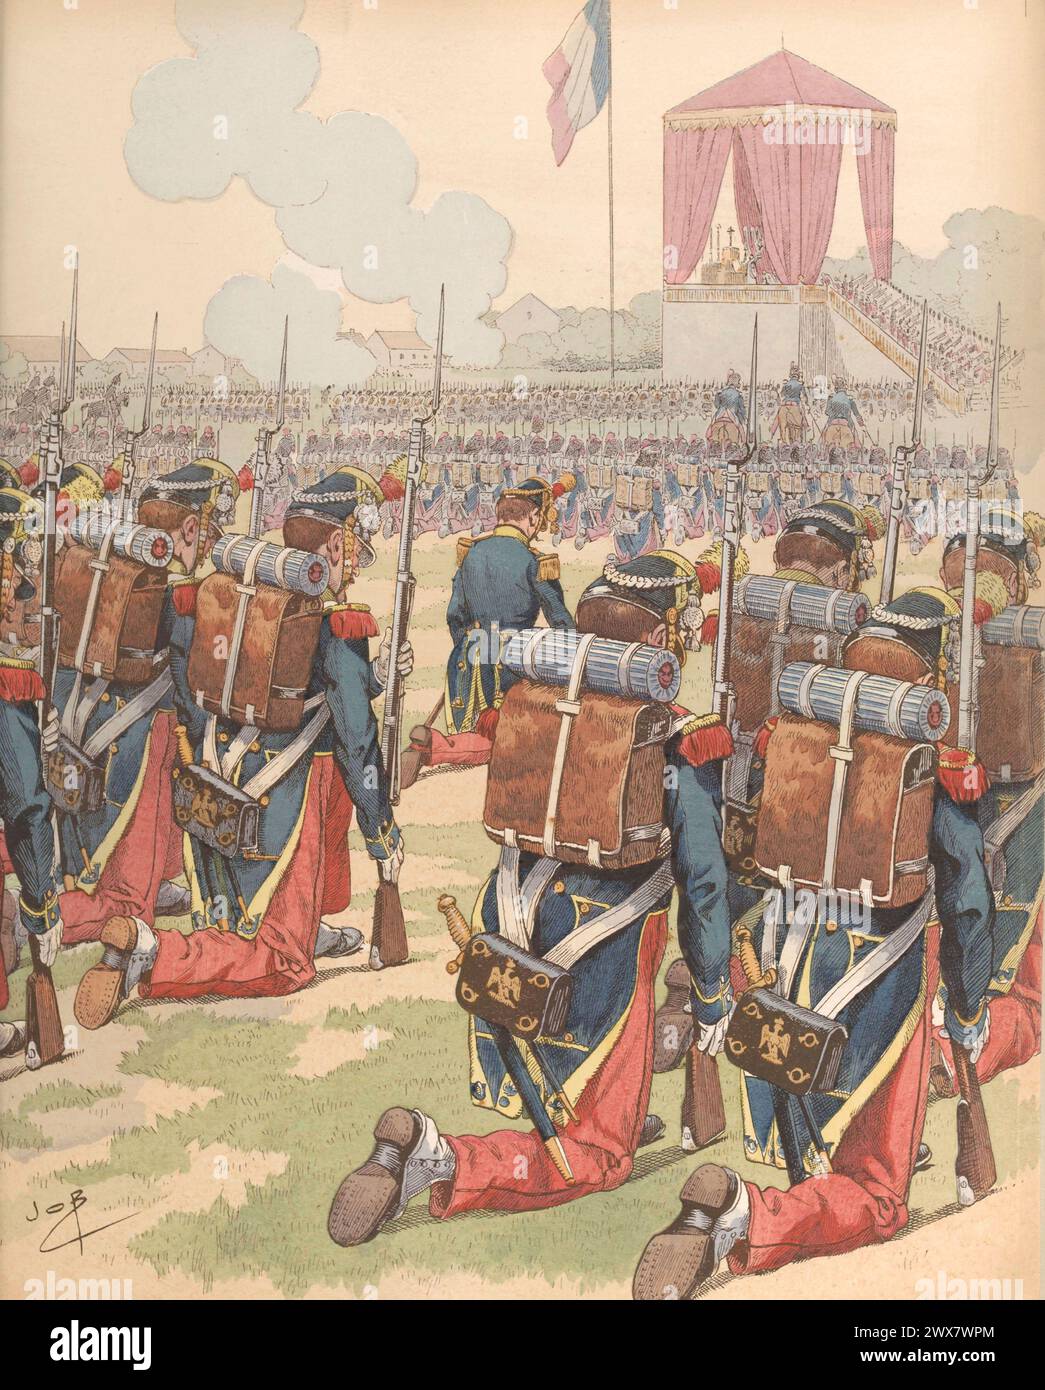 Military review at the camp de Châlons in front of Nicolas II of Russia in 1896.  Illustration by Job published in the book 'Allons, Enfants de la Patrie !...' by Jean Richepin. Published by A. Mame et fils in 1920. Stock Photo